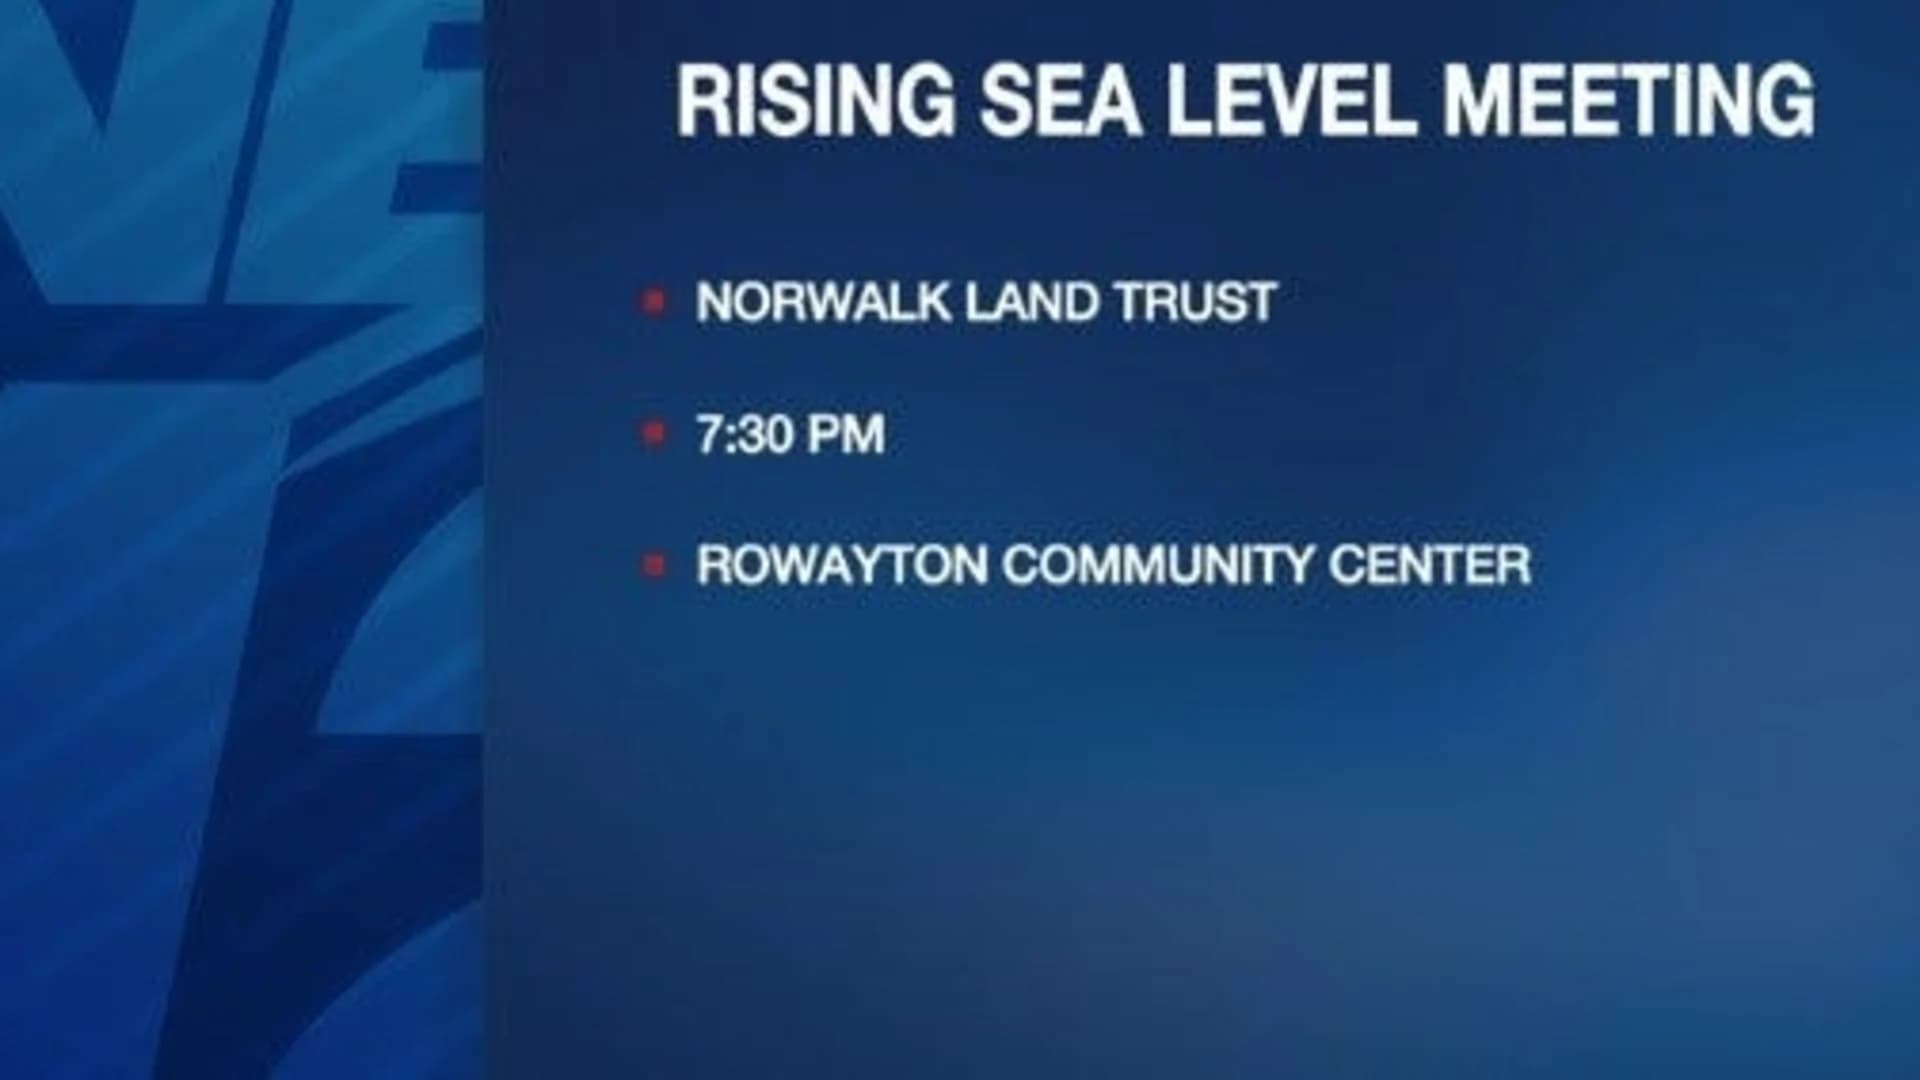 Meeting held to discuss impact of rising sea levels in Norwalk